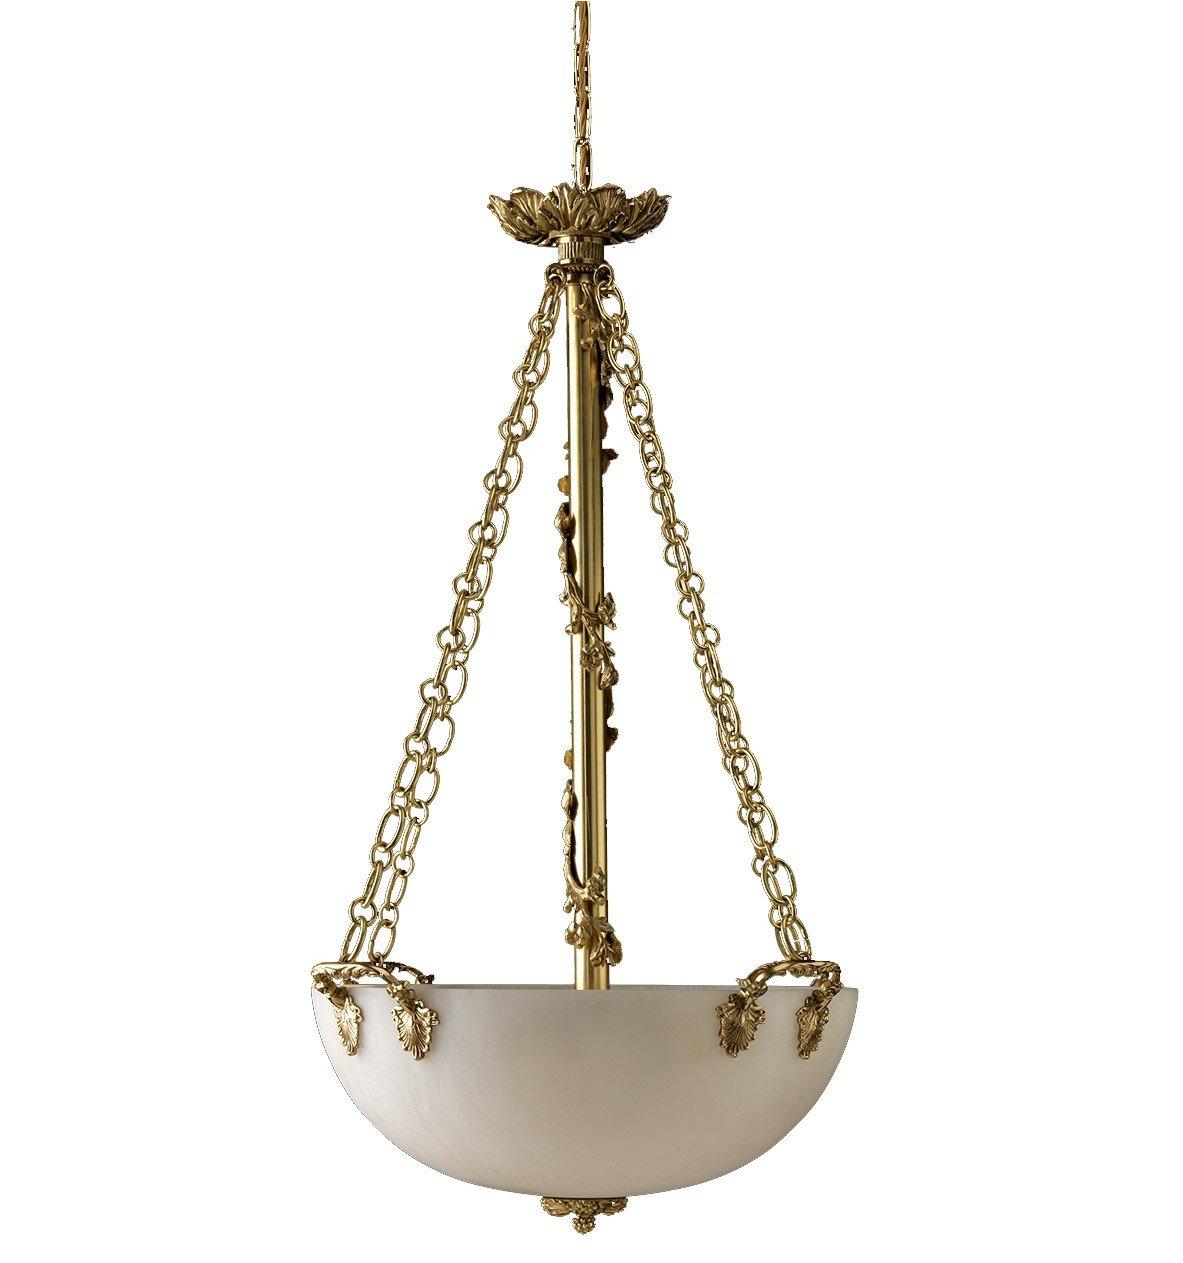 This bold chandelier will exude glamour and timeless sophistication, diffusing dramatic light in any room. A sleek demilune silhouette in ivory alabaster effortlessly hangs from two bold chain strands and a central solid rod. The chains connect to